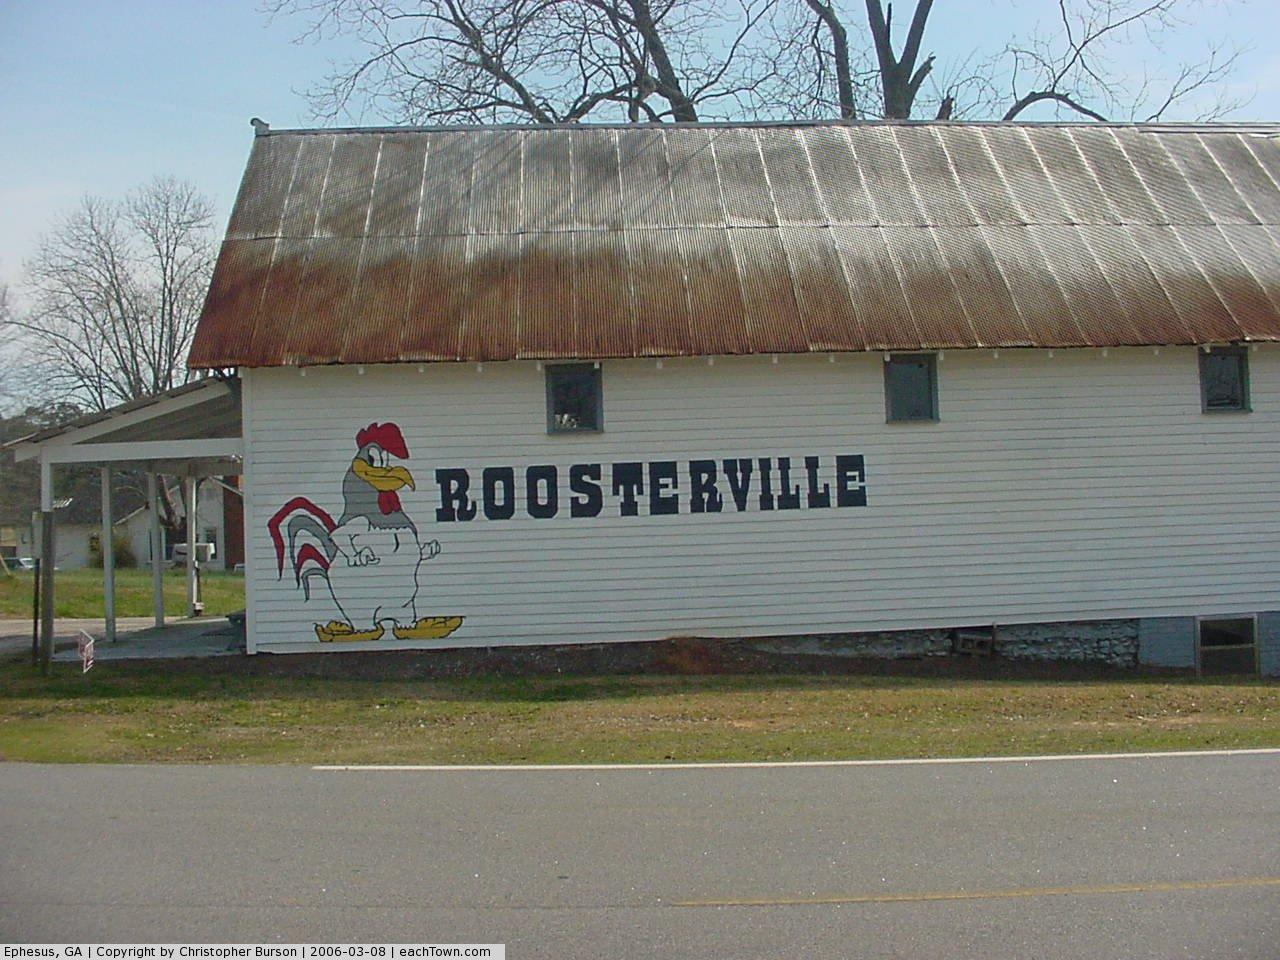  - Roosterville, GA - Near Ephesus - Community store built around 1900 - I once lived in the house next door.